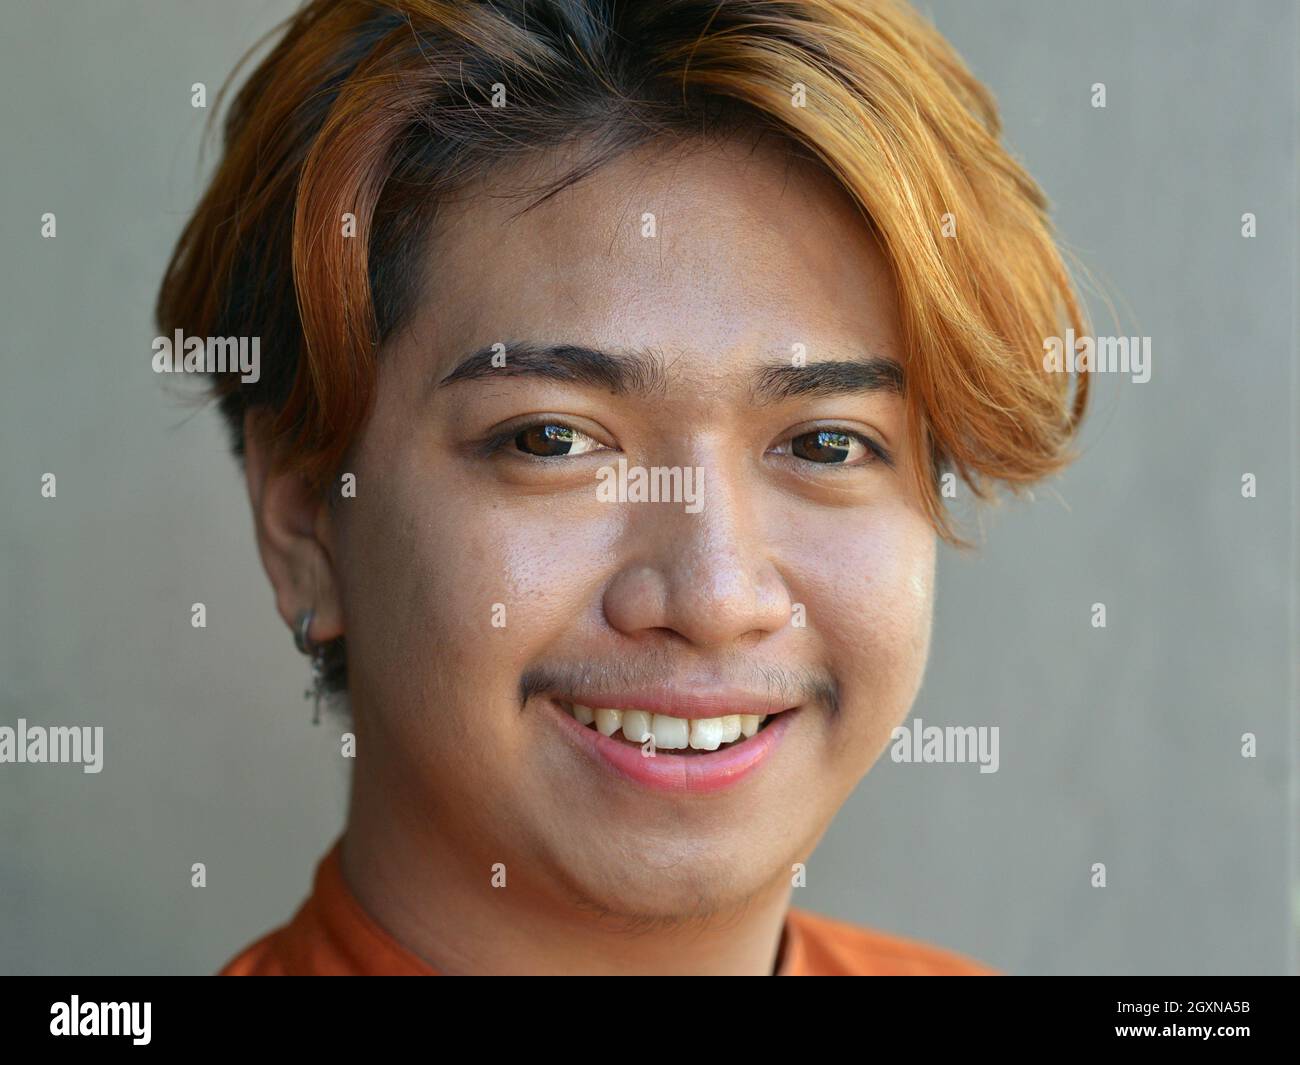 Positive optimistic young male Indonesian Balinese massage therapist with dyed hair and contact lenses smiles for the camera. Stock Photo